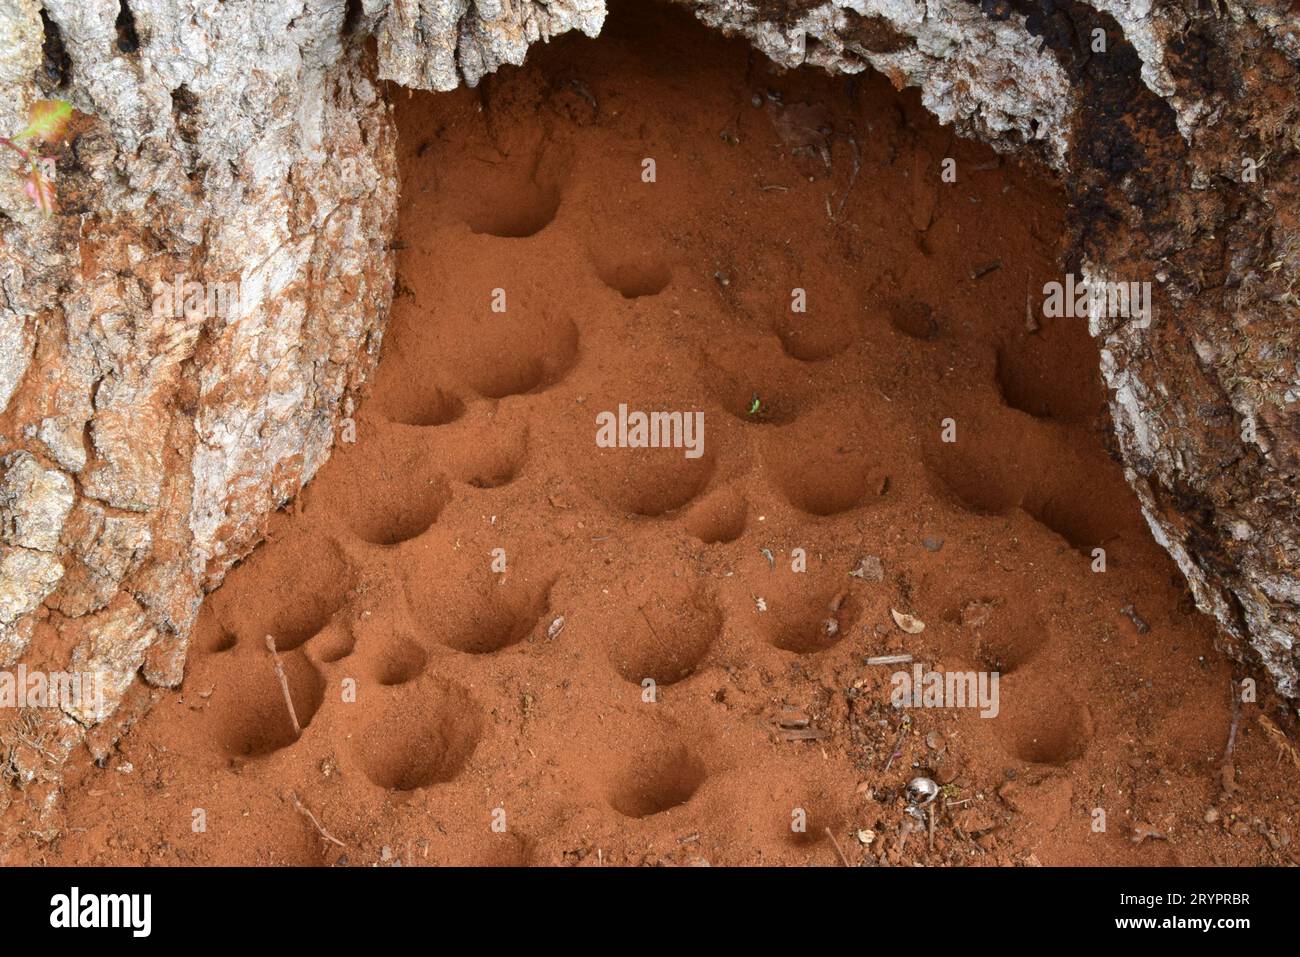 Ant Lion (Myrmeleontidae sp.). Sand pits of larvae traps under a dead tree. Germany Stock Photo